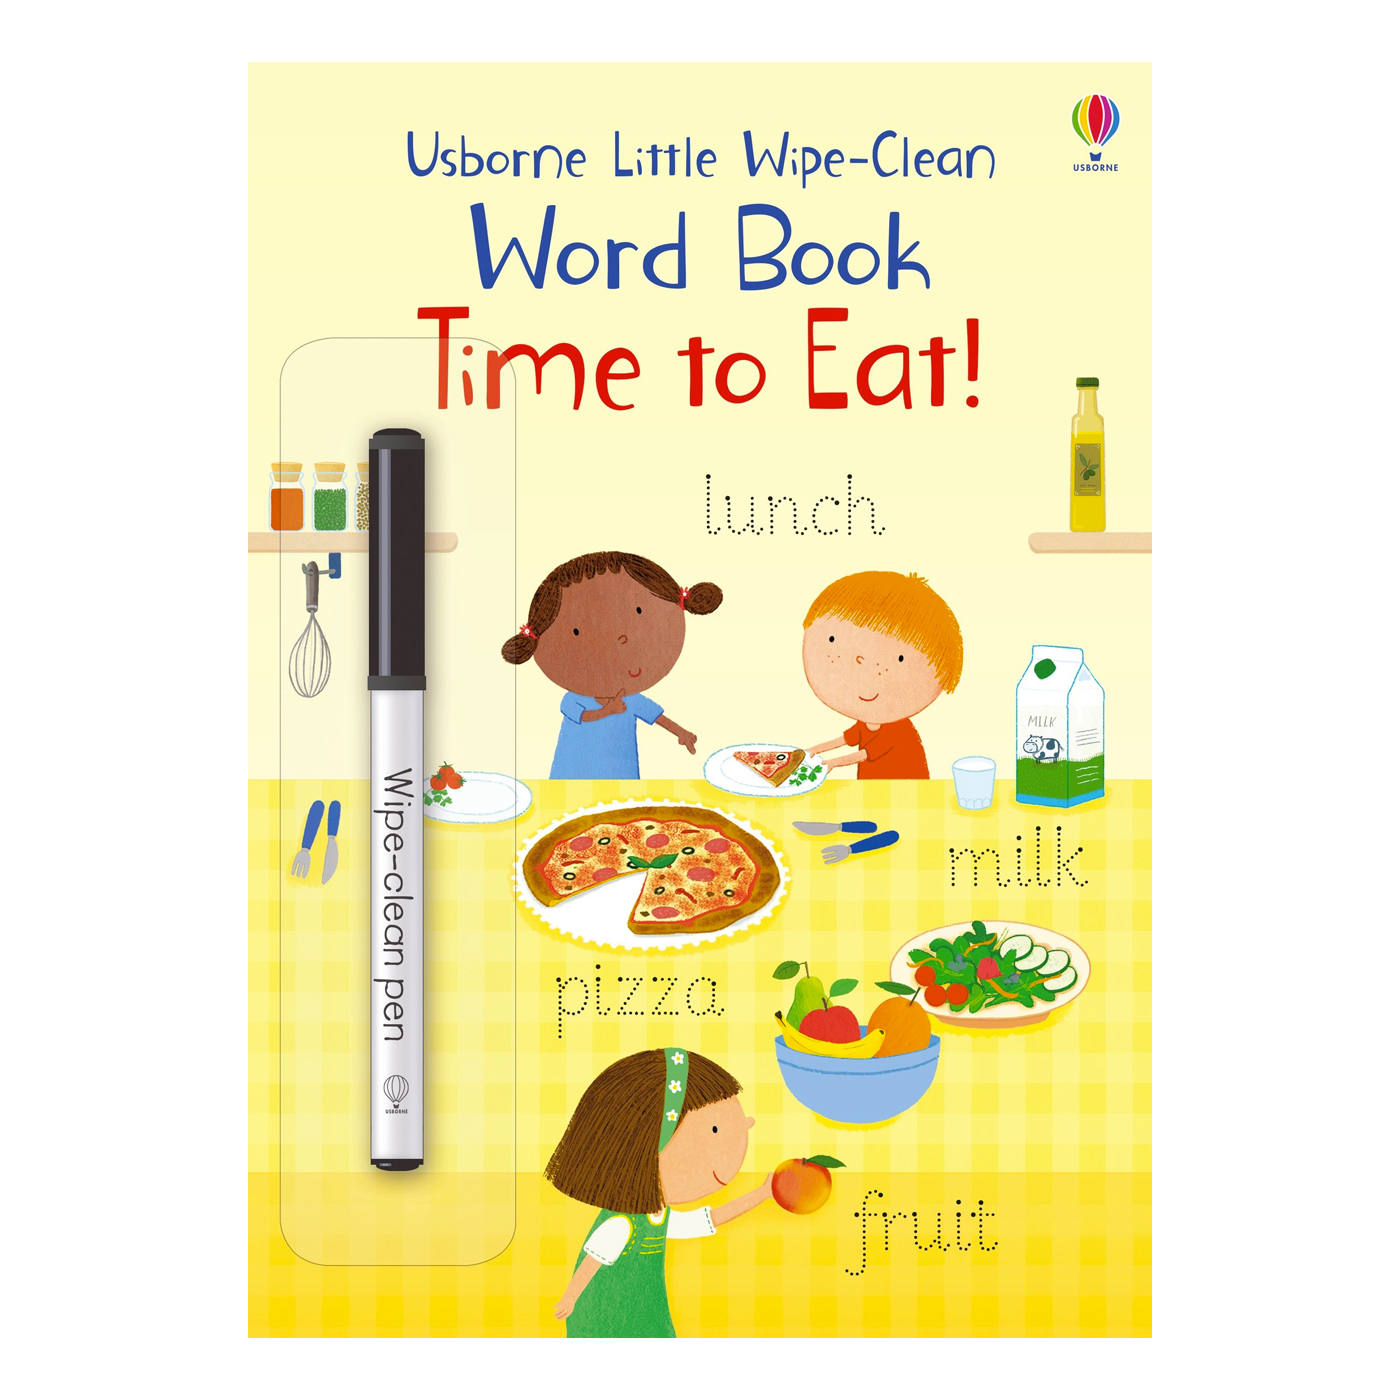 USBORNE Little Wipe-Clean Word Book Time to Eat!